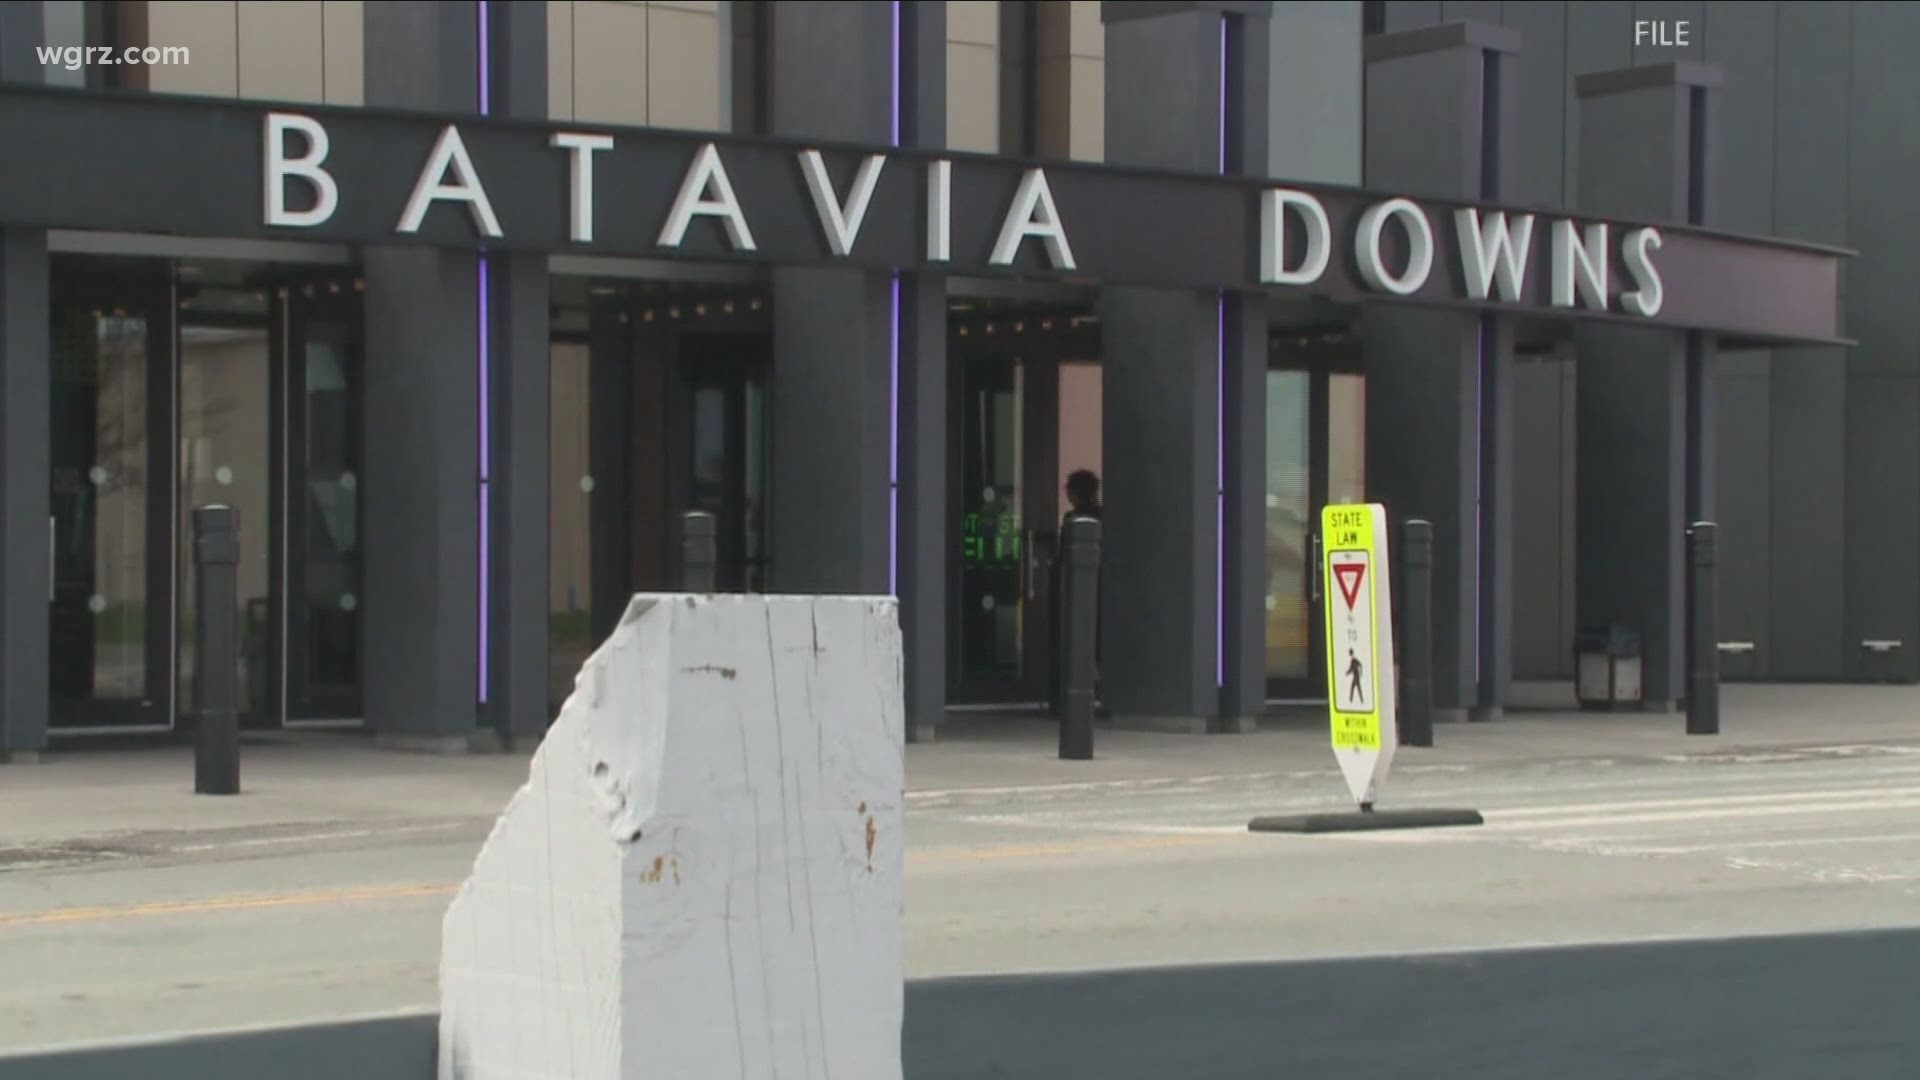 Batavia Downs will not require a vaccination or negative COVID test to attend. Instead, seating will be socially distanced.